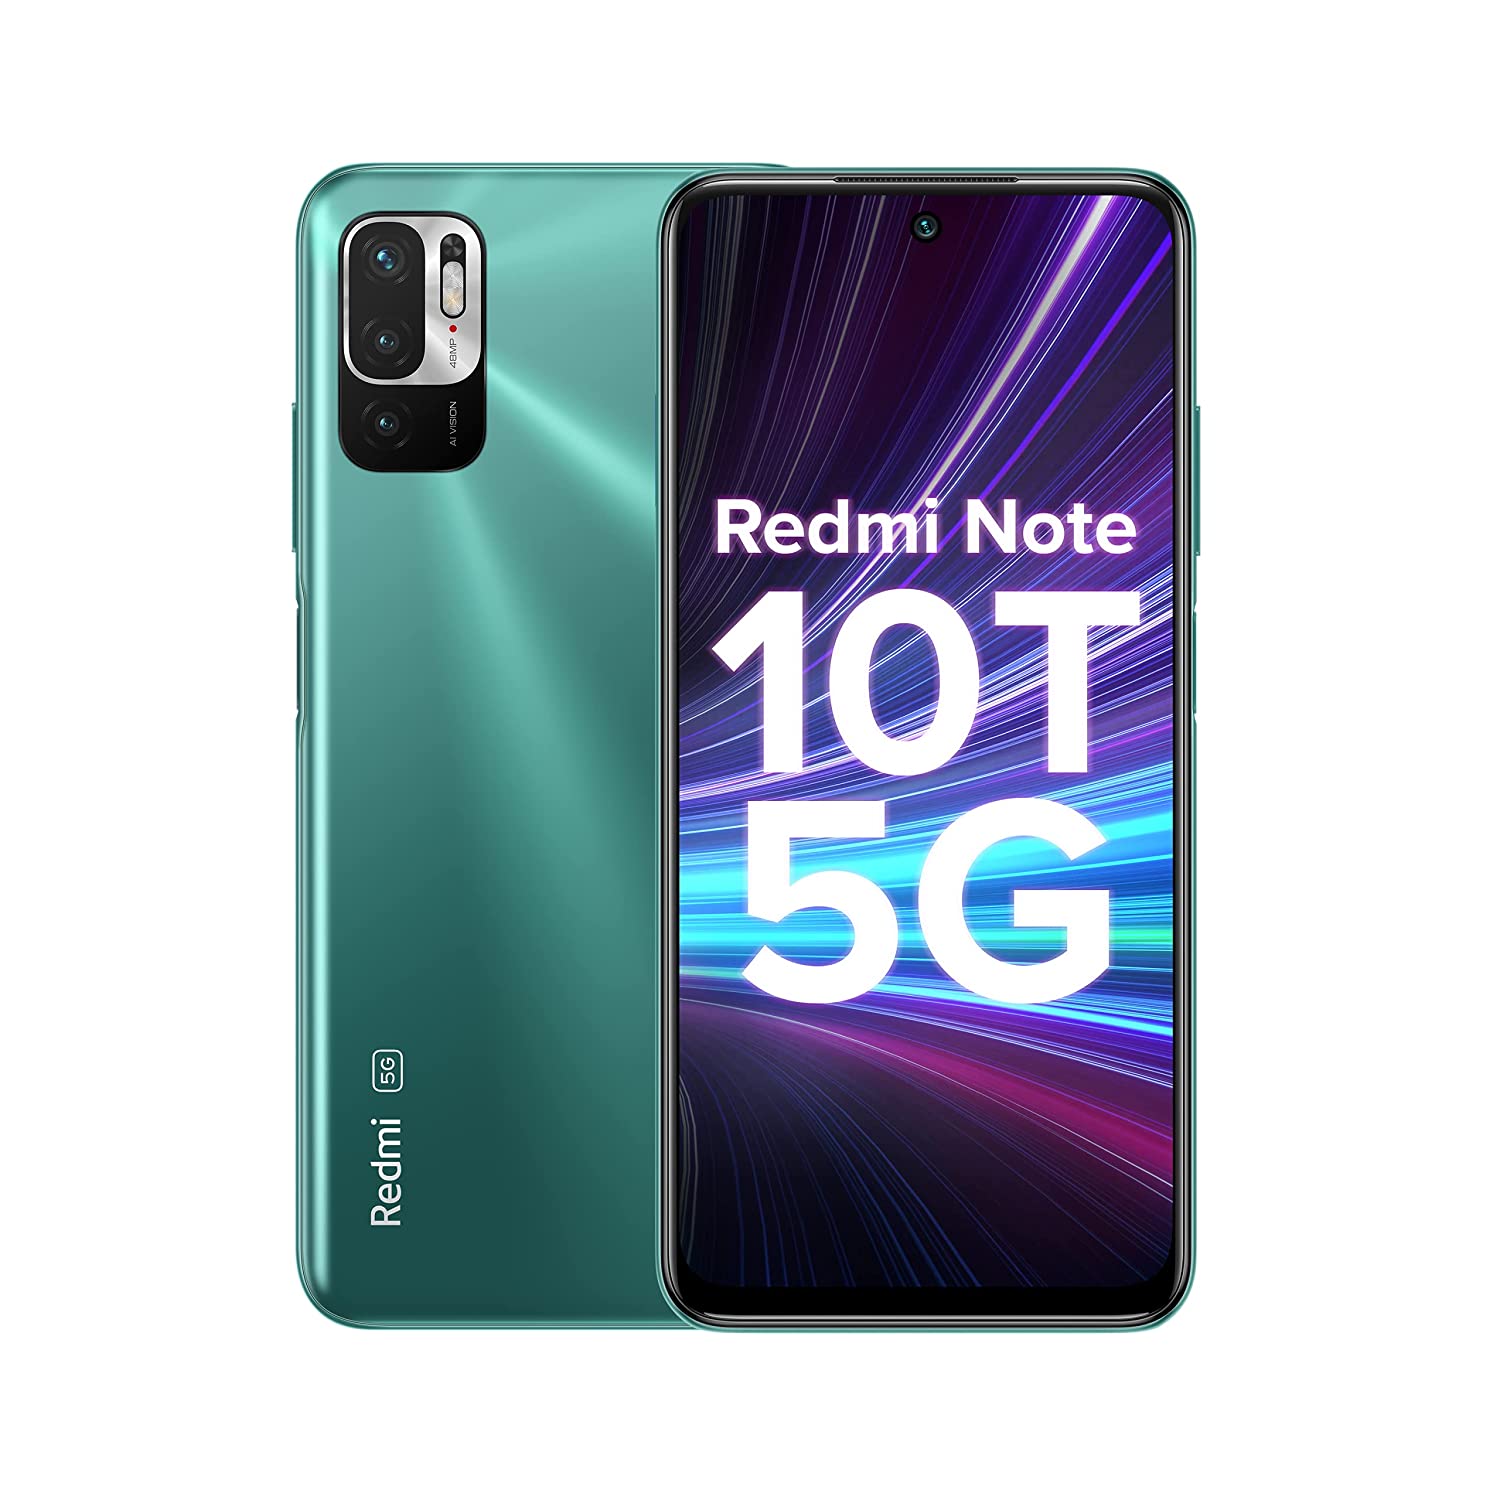 Redmi Note 10T 5G | Dual5G | 90Hz Adaptive Refresh Rate | MediaTek Dimensity 700 7nm Processor | 22.5W Charger Included